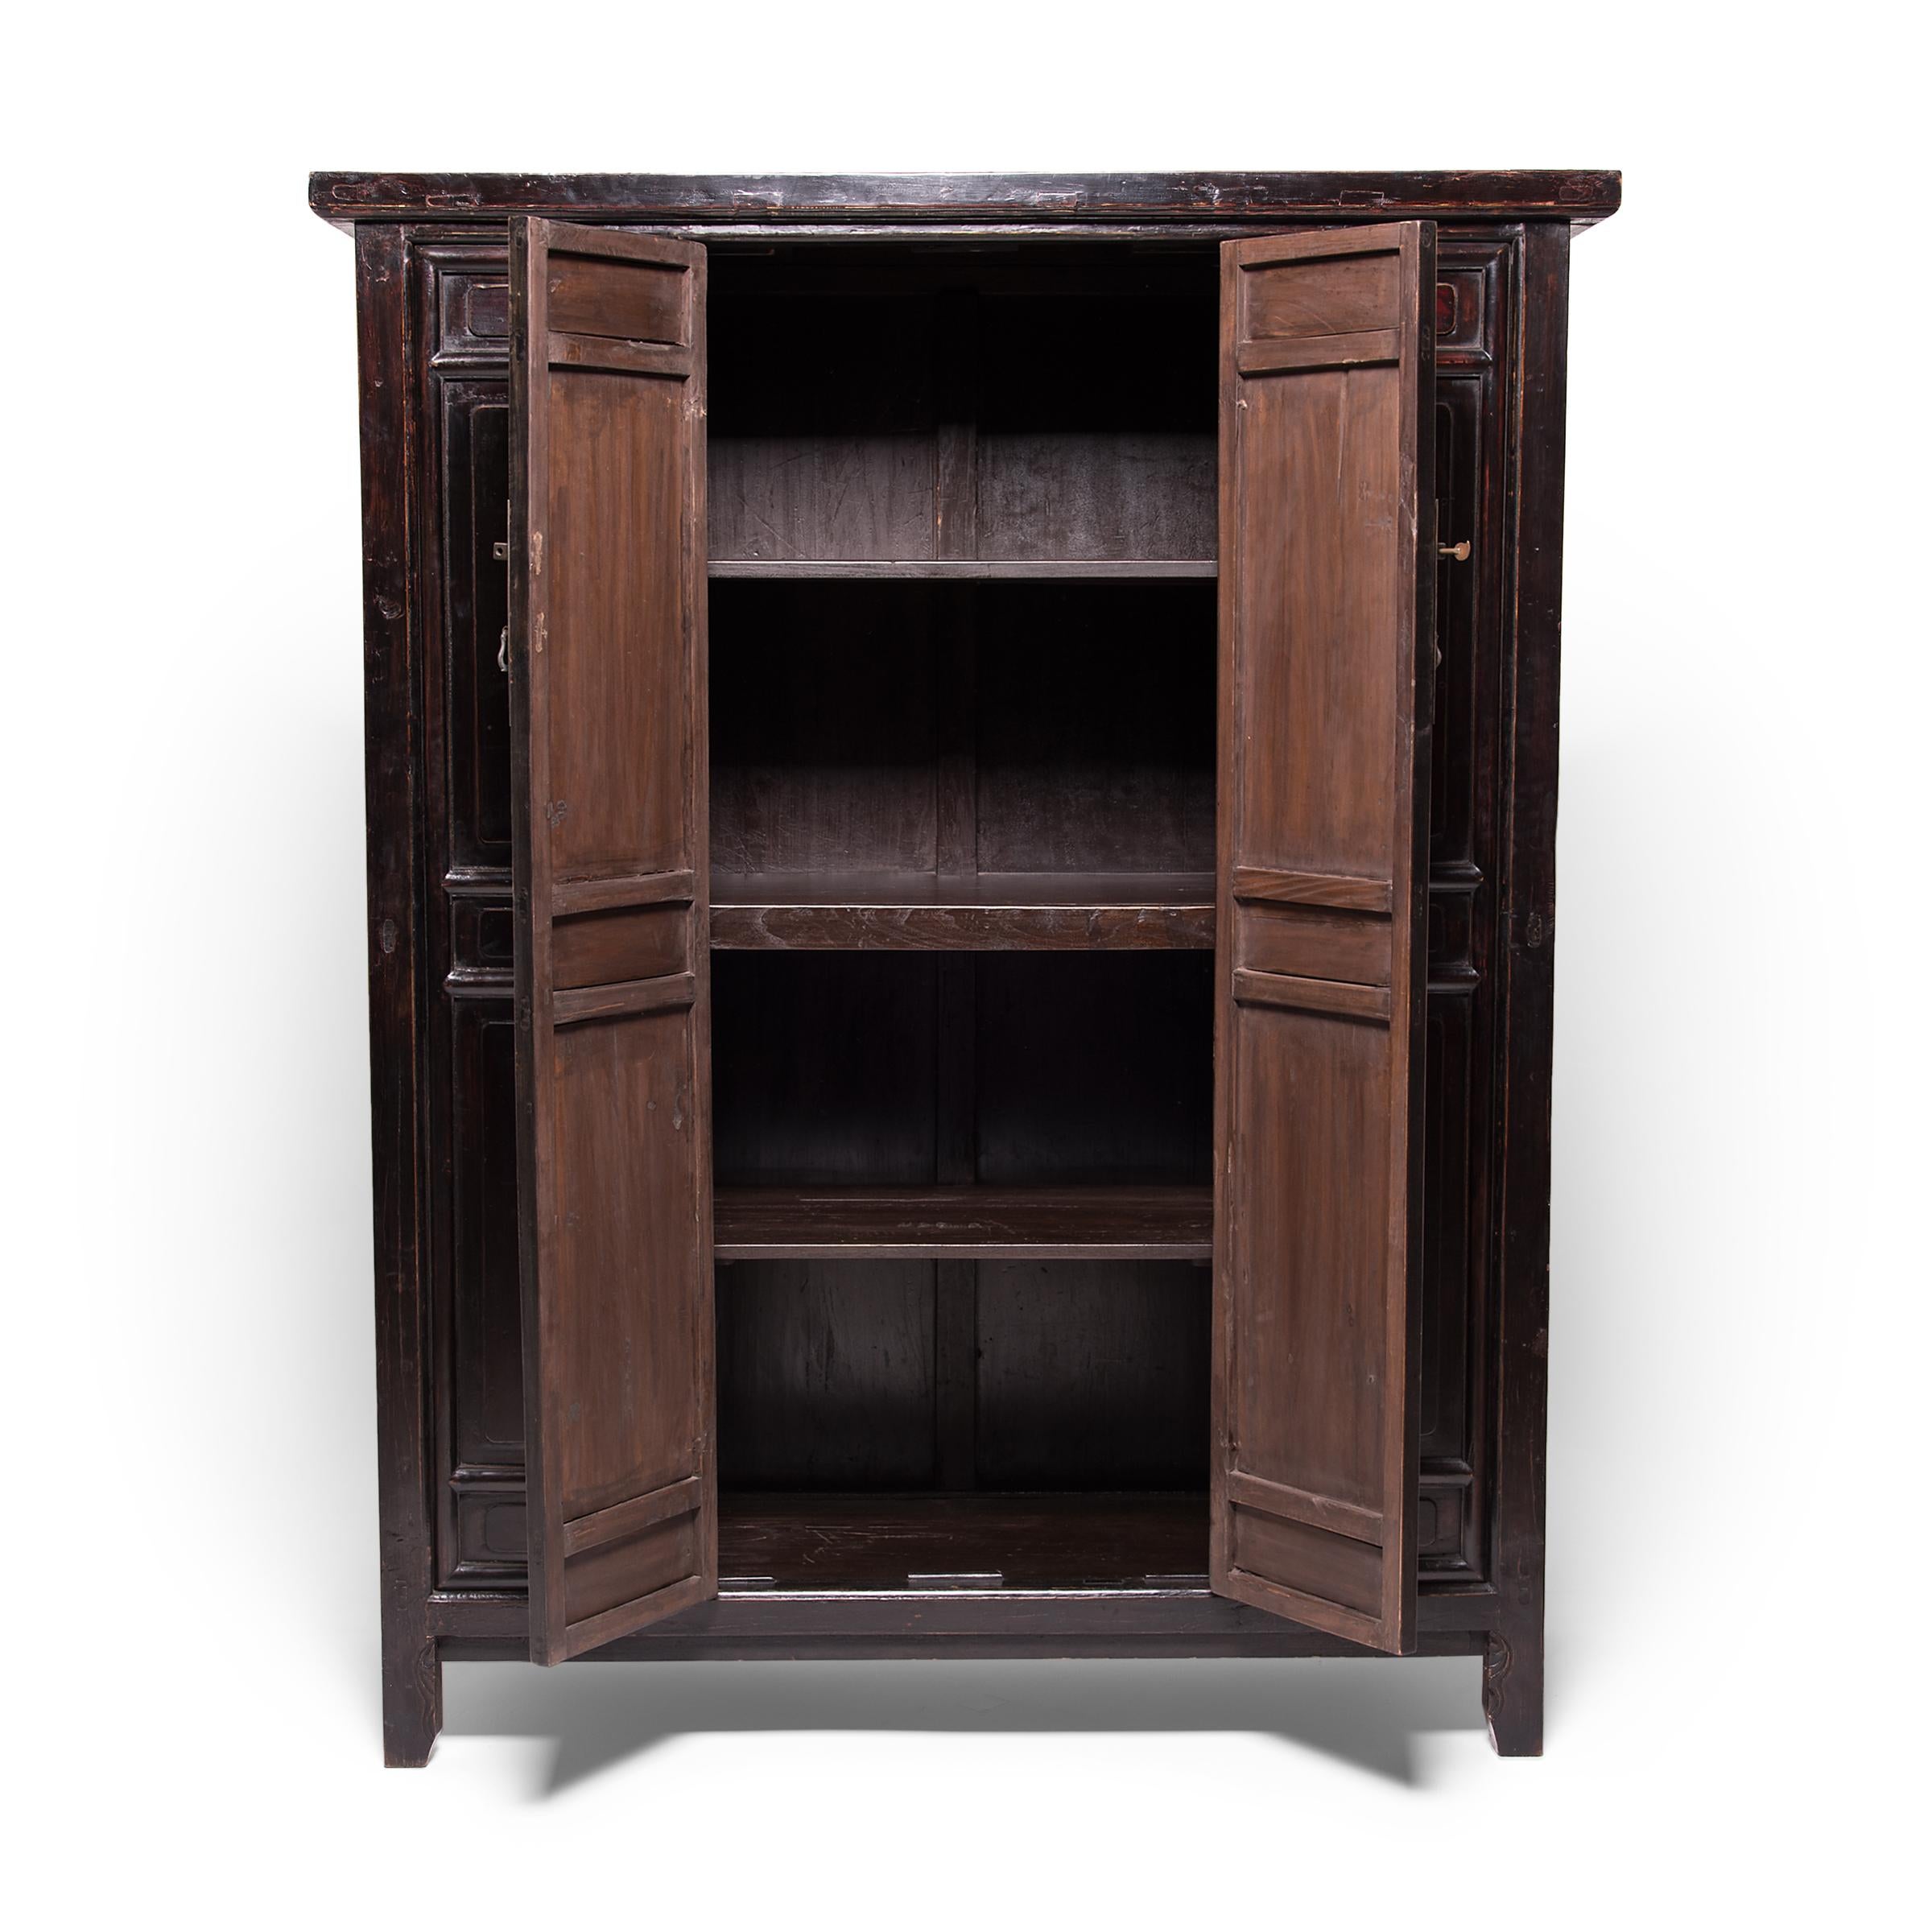 Beautiful in its austerity, this grand cabinet from China’s Shanxi province dates from the middle of the 19th century. Featuring two sets of bi-fold doors, the cabinet is elegantly carved with subtly detailed panels that are designed as 